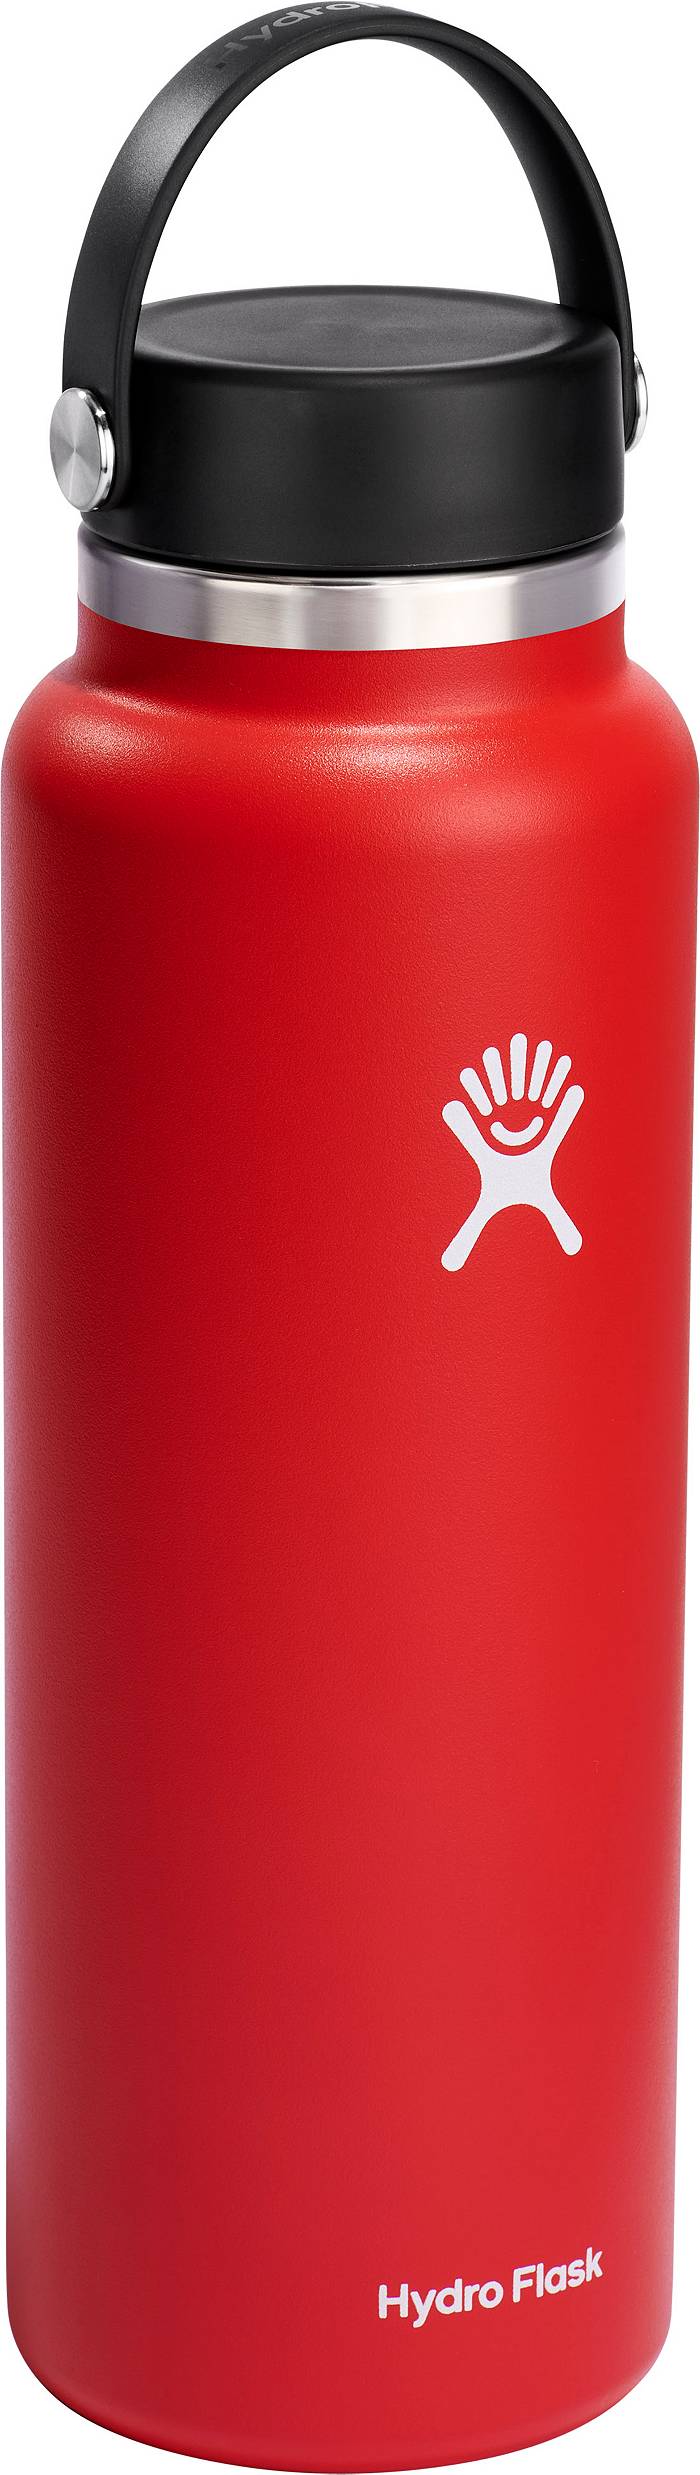 Hydro Flask 40oz Wide Mouth Insulated Stainless Water Bottle-Rain